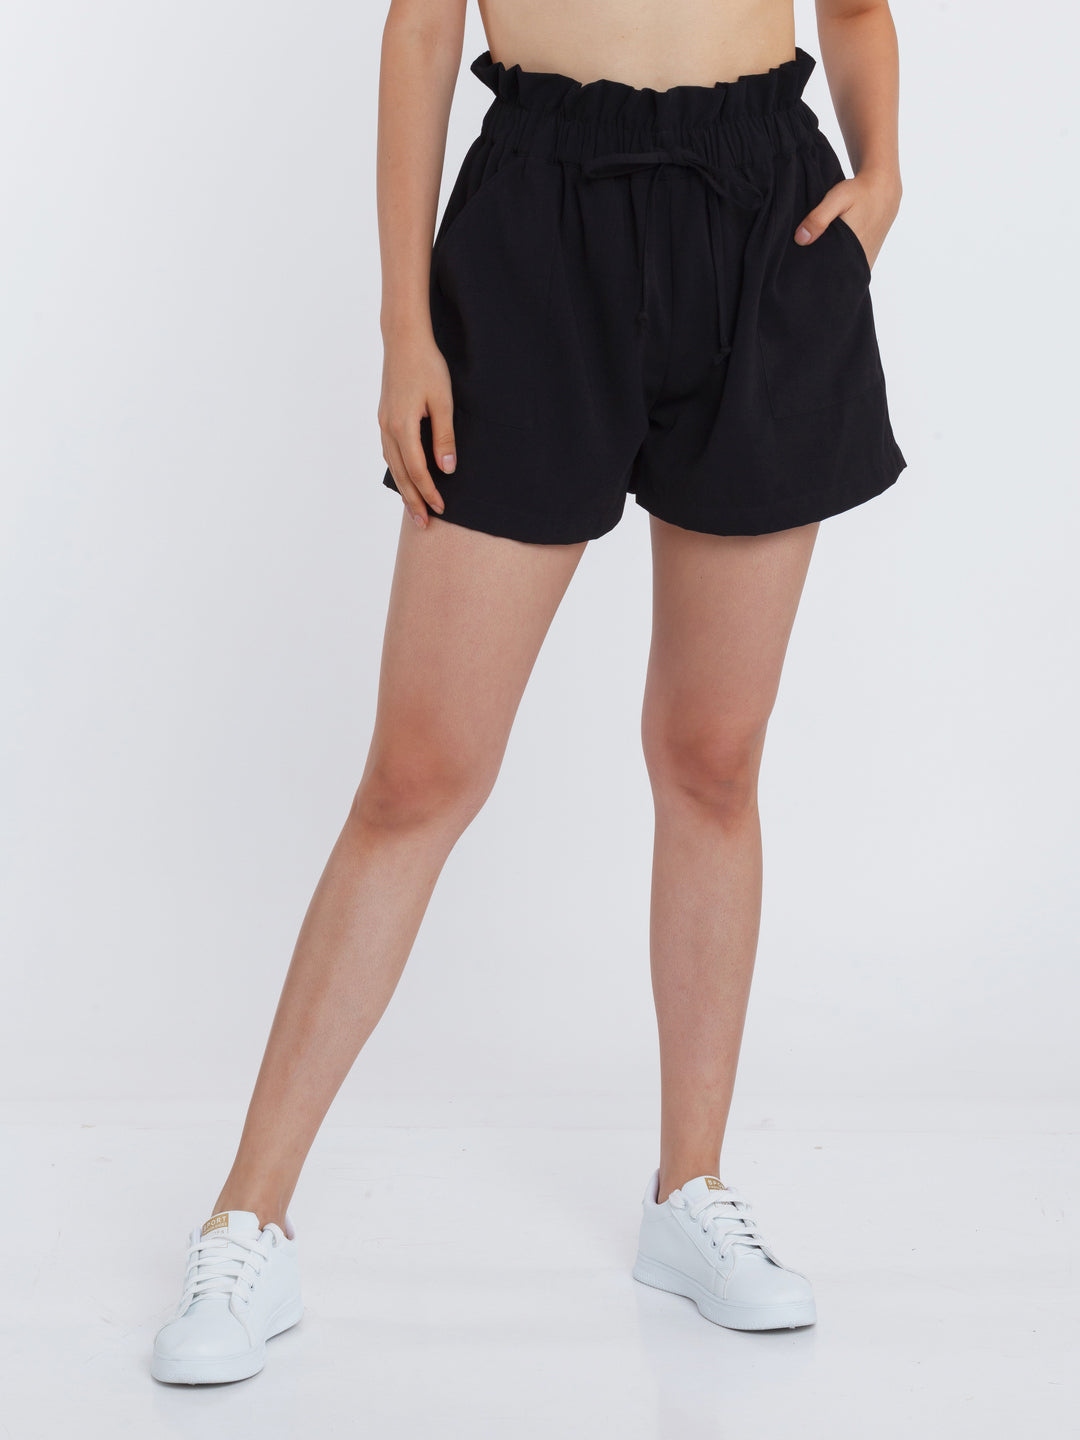 Black Solid High Waisted Shorts For Women